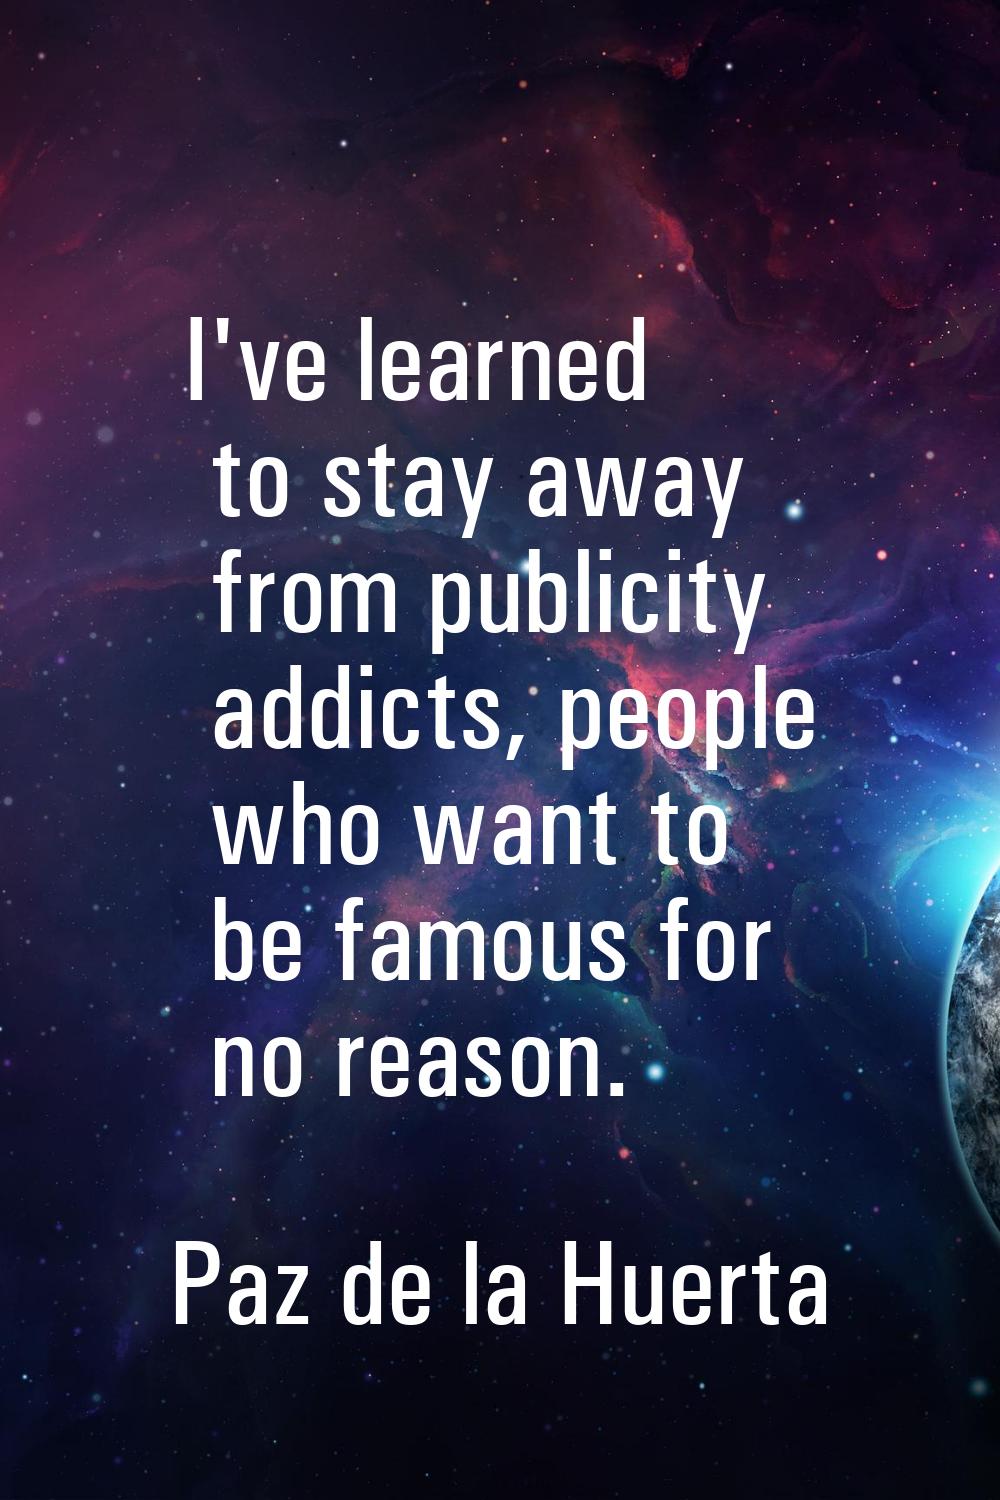 I've learned to stay away from publicity addicts, people who want to be famous for no reason.